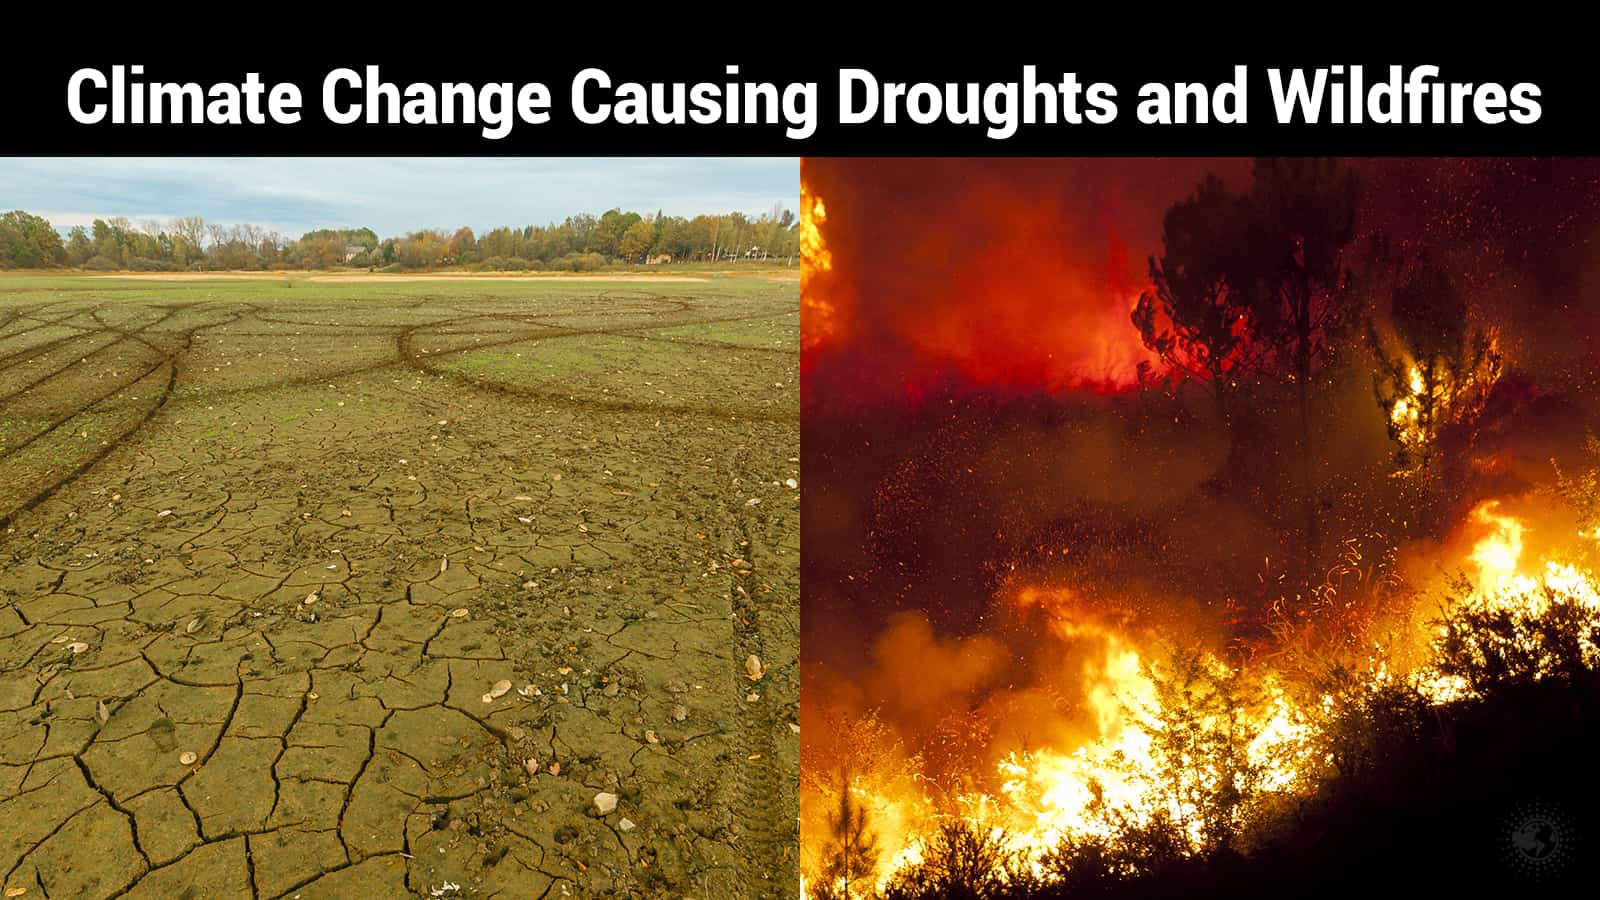 Researchers Confirm: Climate Change Causing Droughts and Wildfires